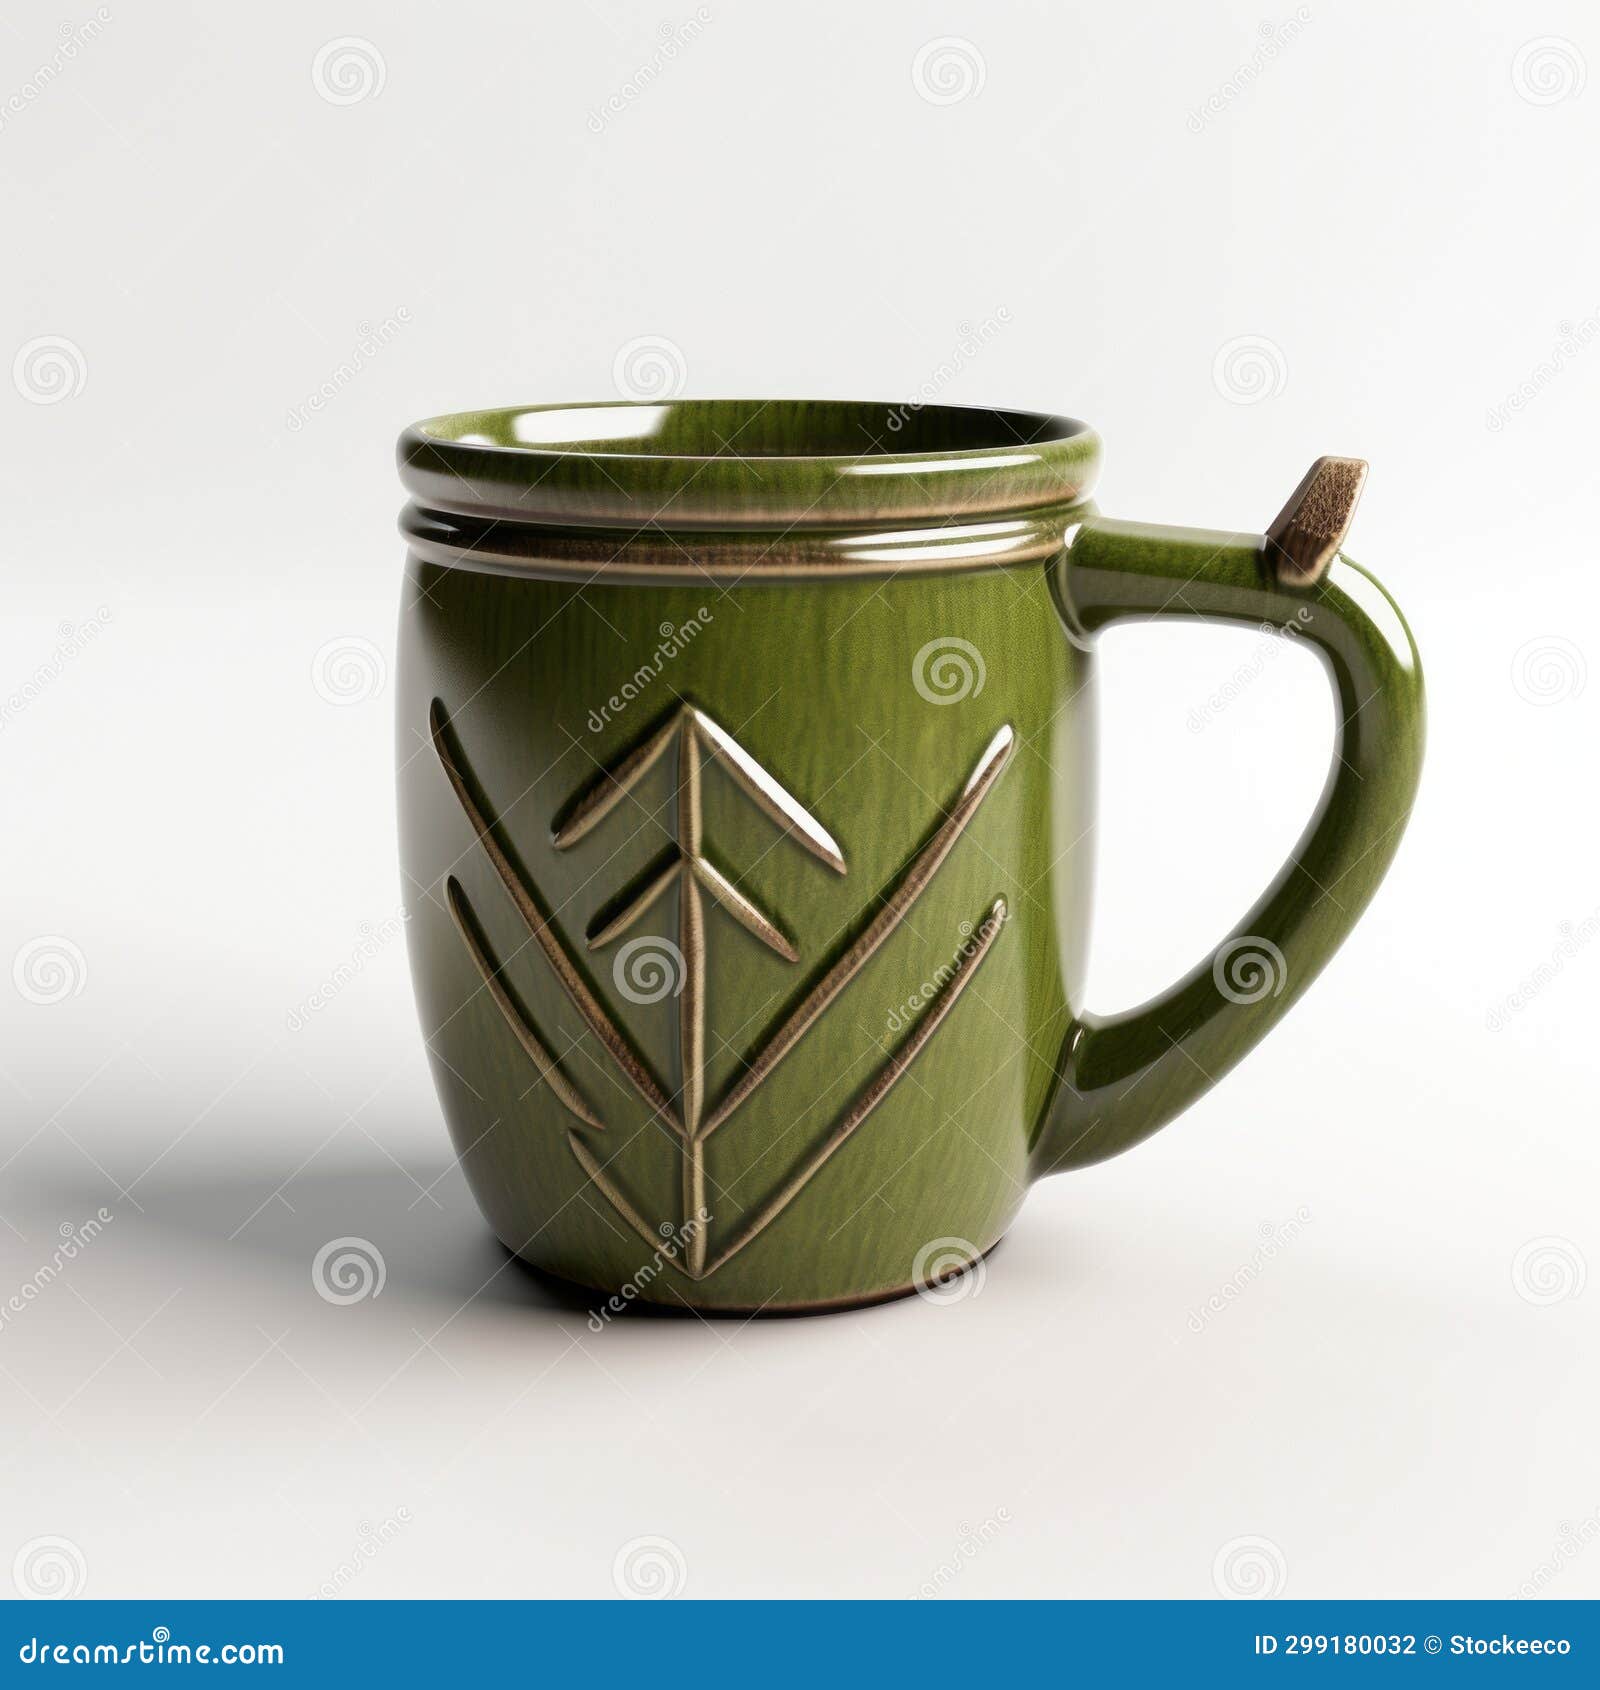 secessionist style green mug with thin arrow 